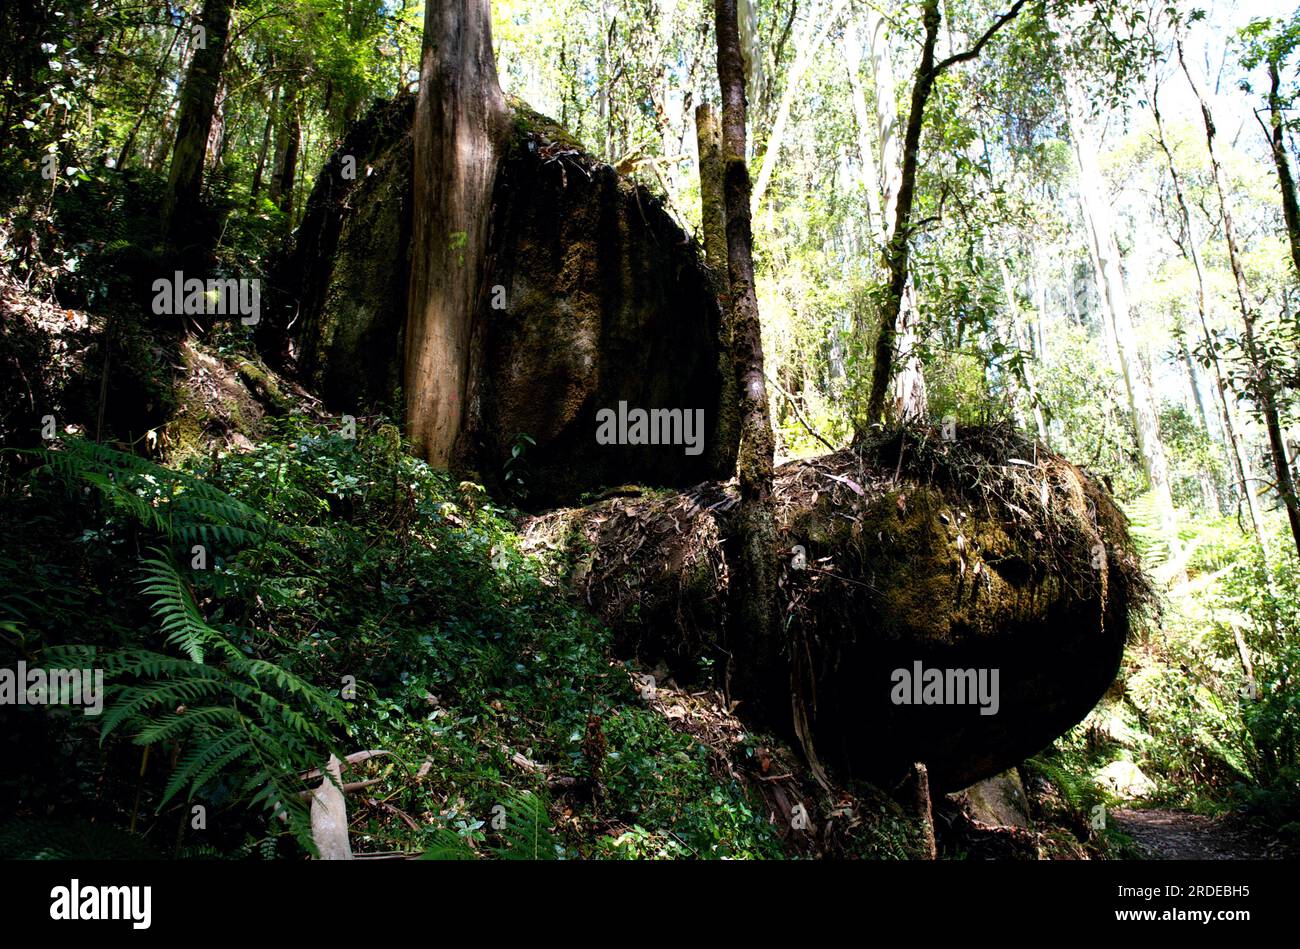 Beware falling rocks in the forest! These boulders were hanging over the track to Amphitheatre Falls, near Noojee in Gippsland, Victoria, Australia. Stock Photo